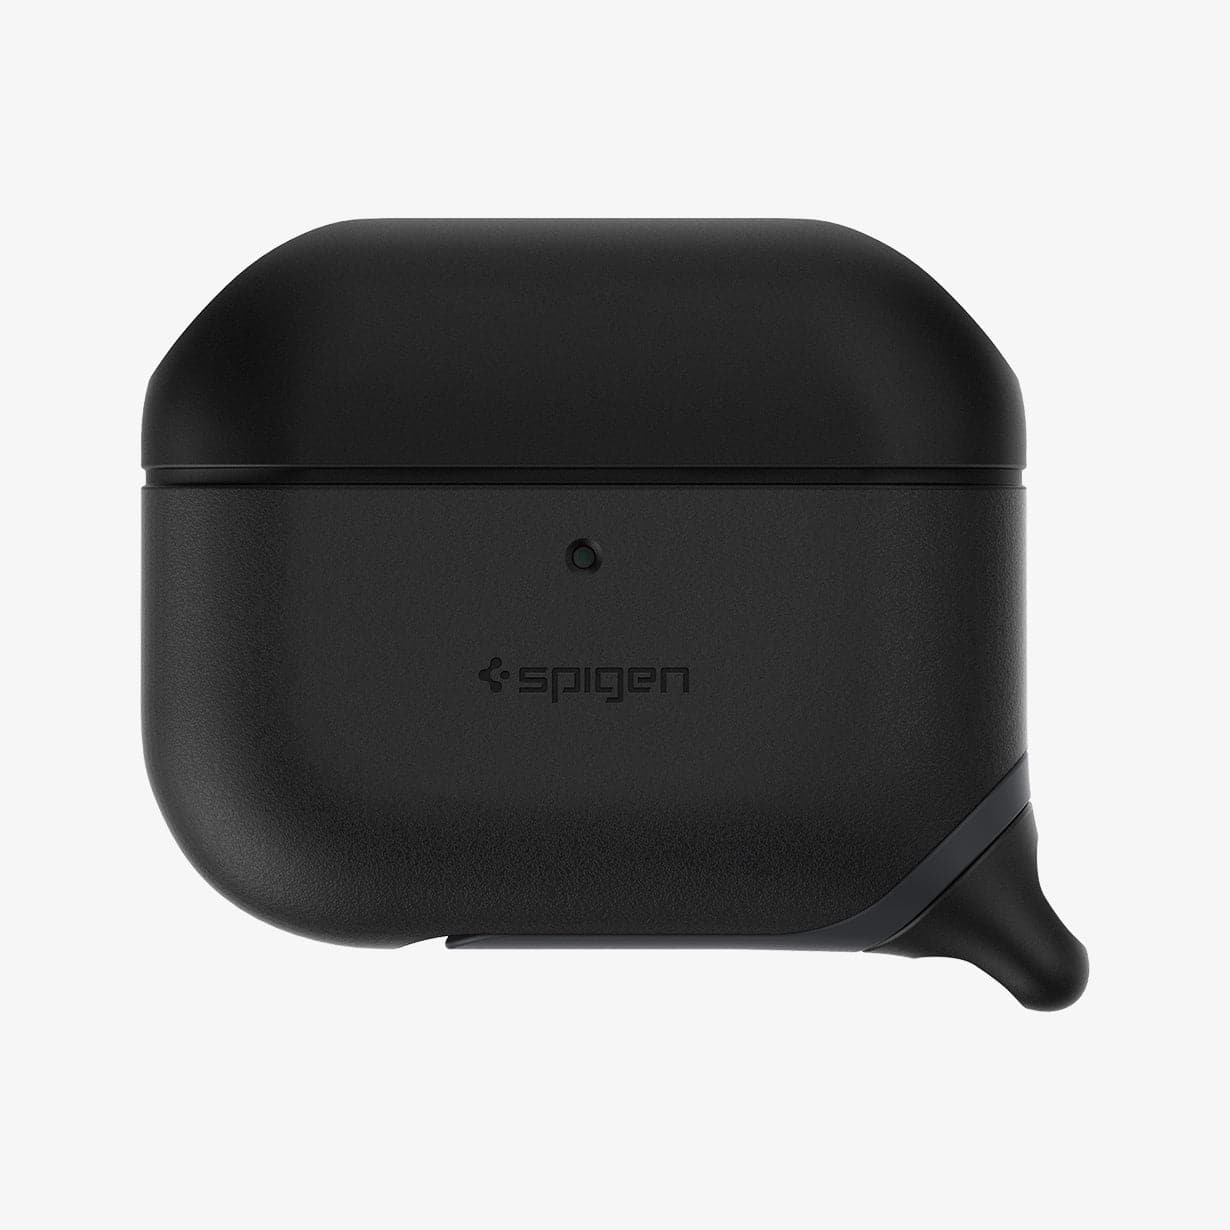 ASD00542 - Apple AirPods Pro / AirPods Pro 2 Case Slim Armor IP in black showing the front